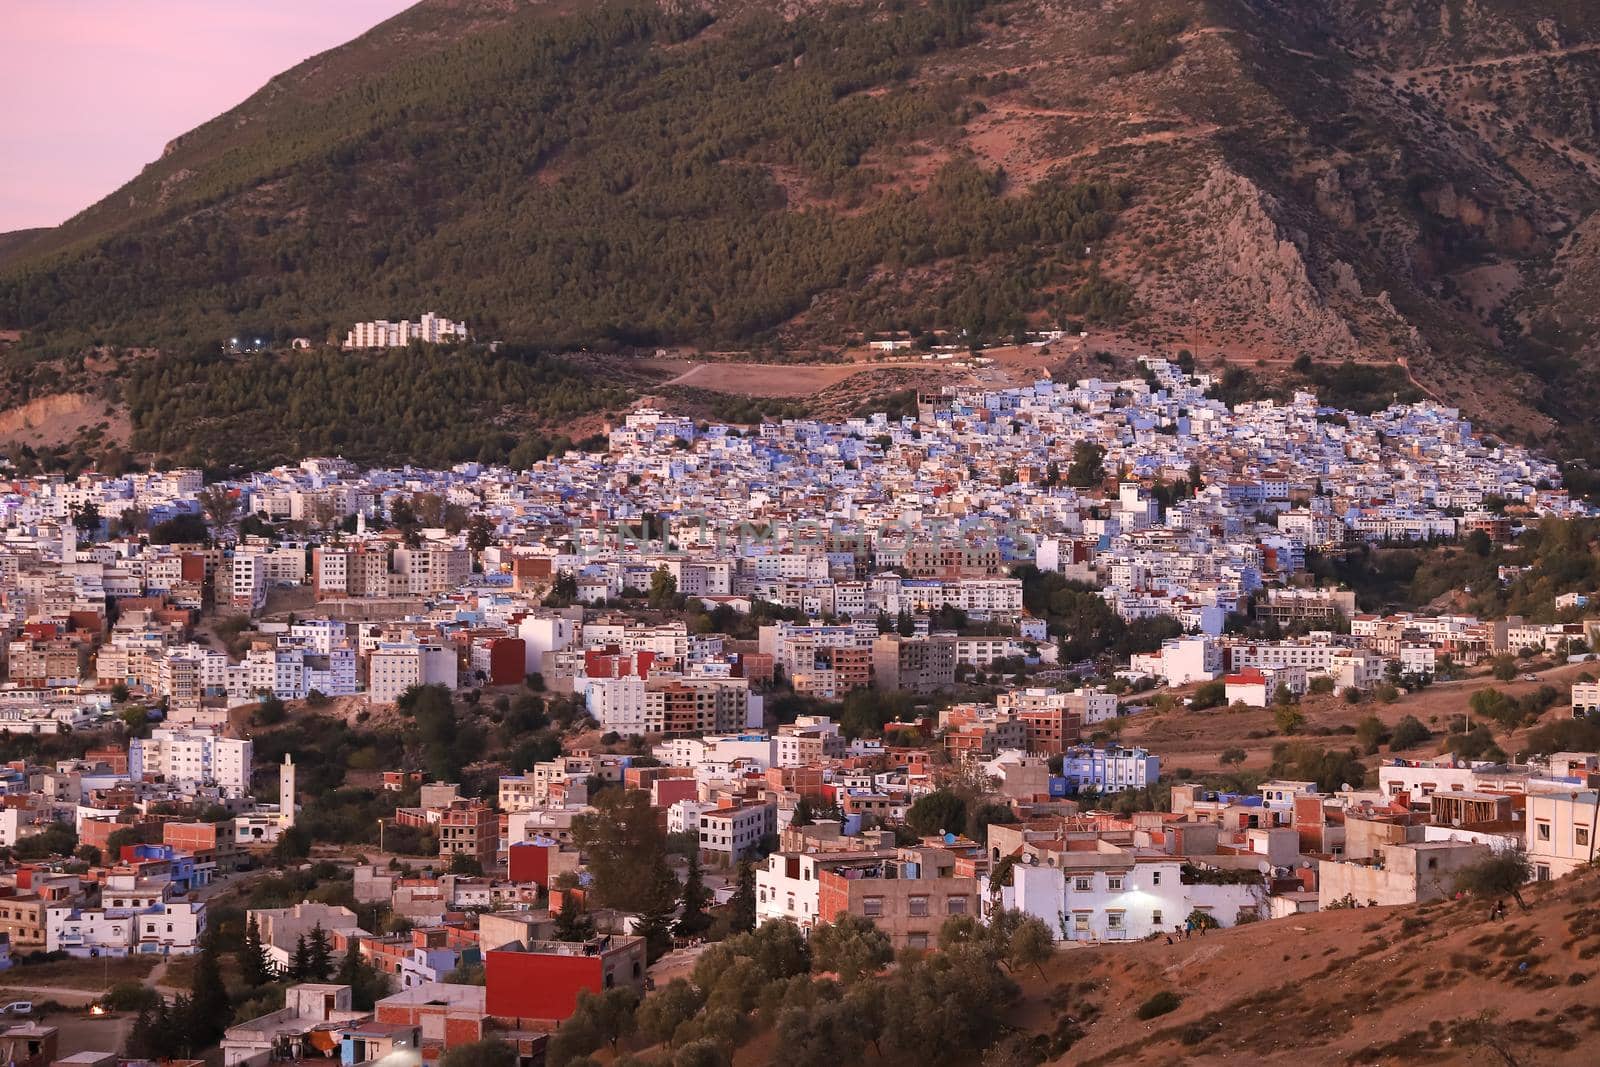 General View of Blue Chefchaouen City in Morocco